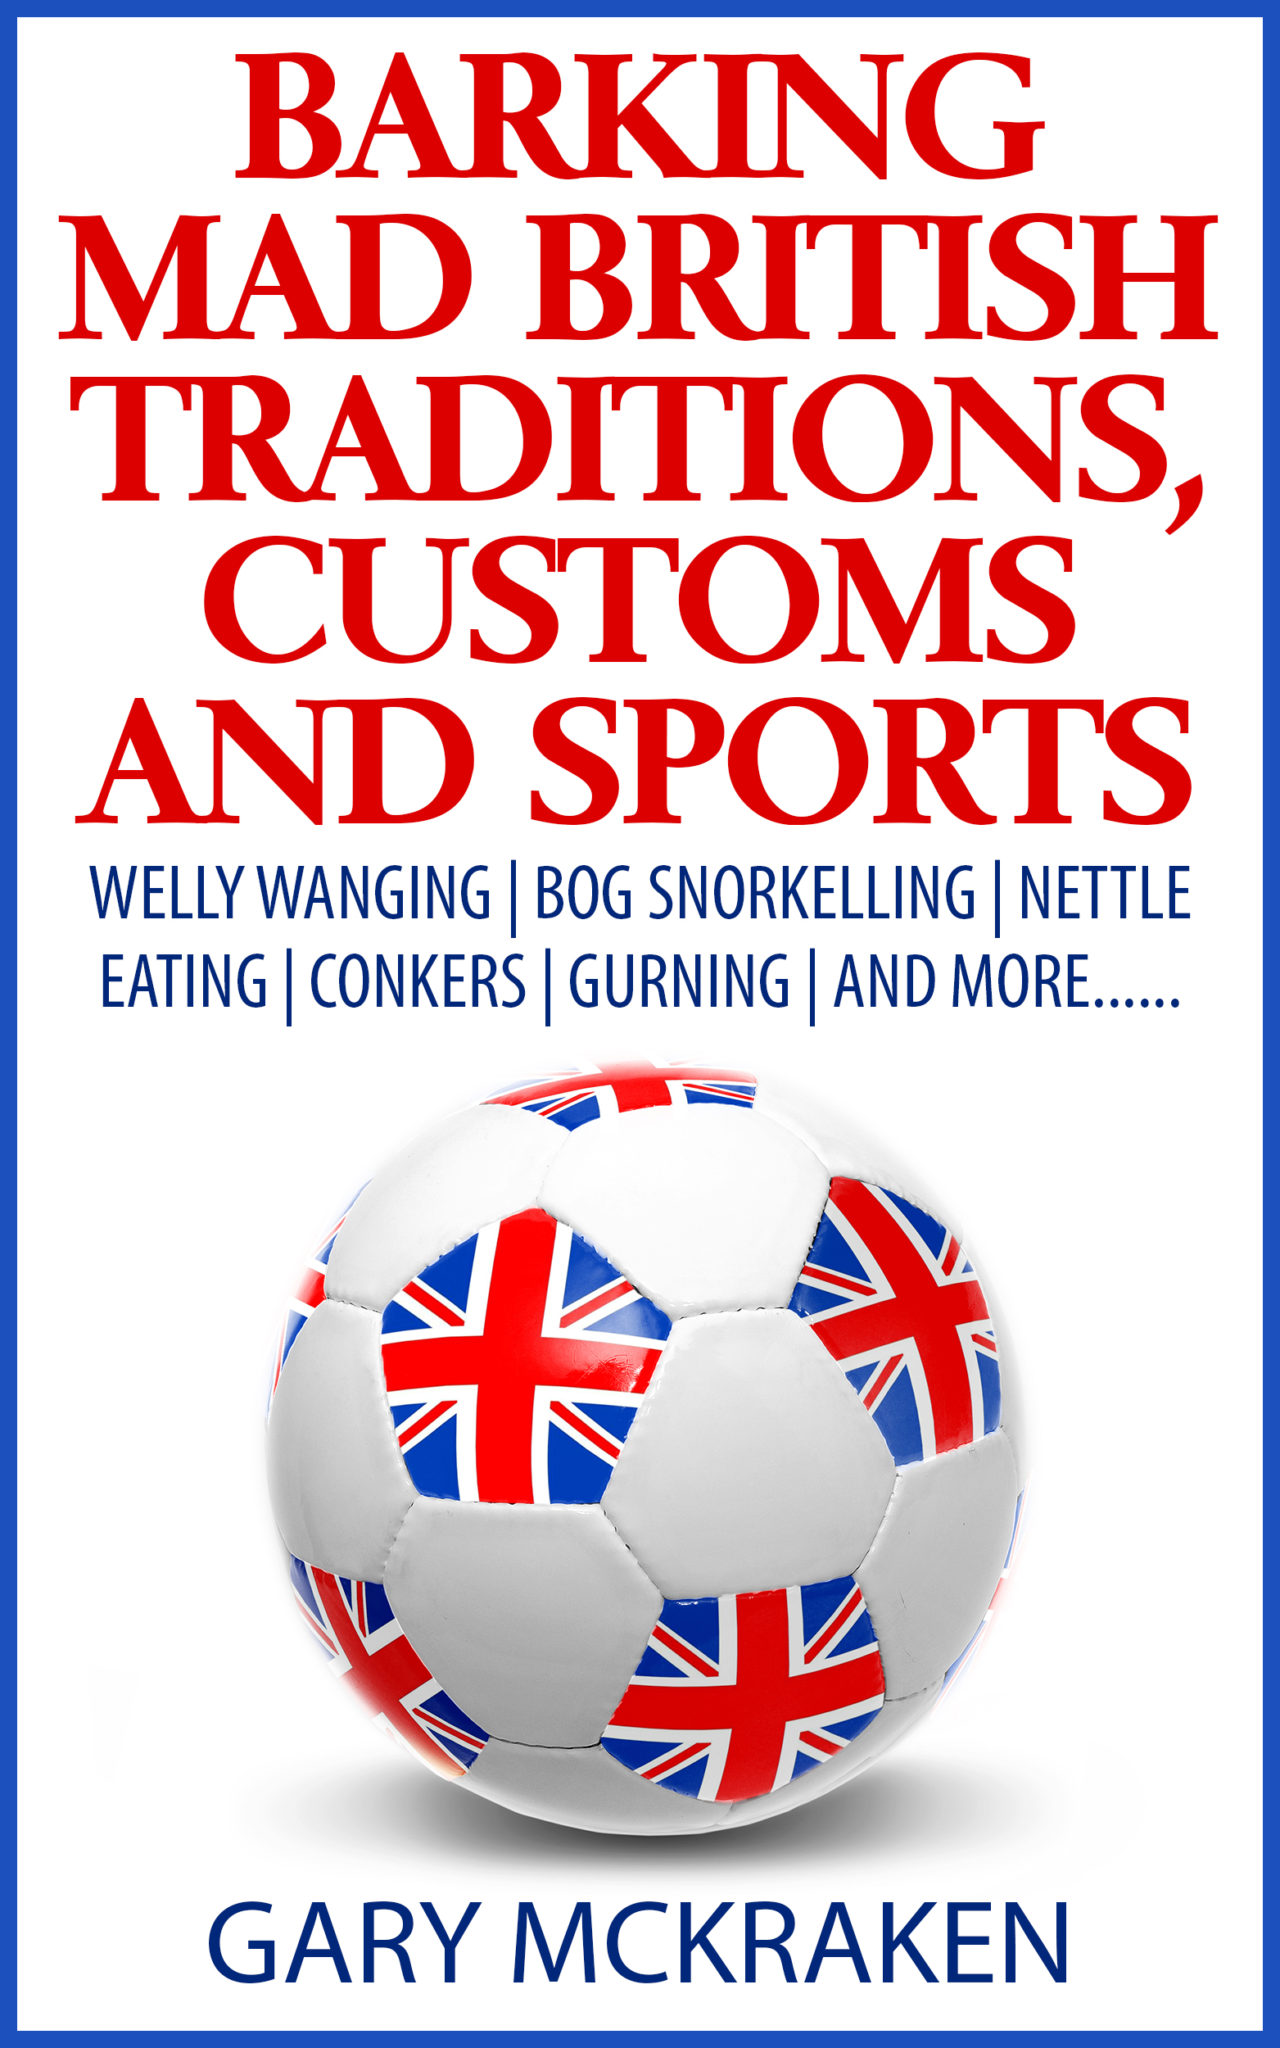 FREE: Barking Mad British Traditions, Customs and Sports by Gary McKraken